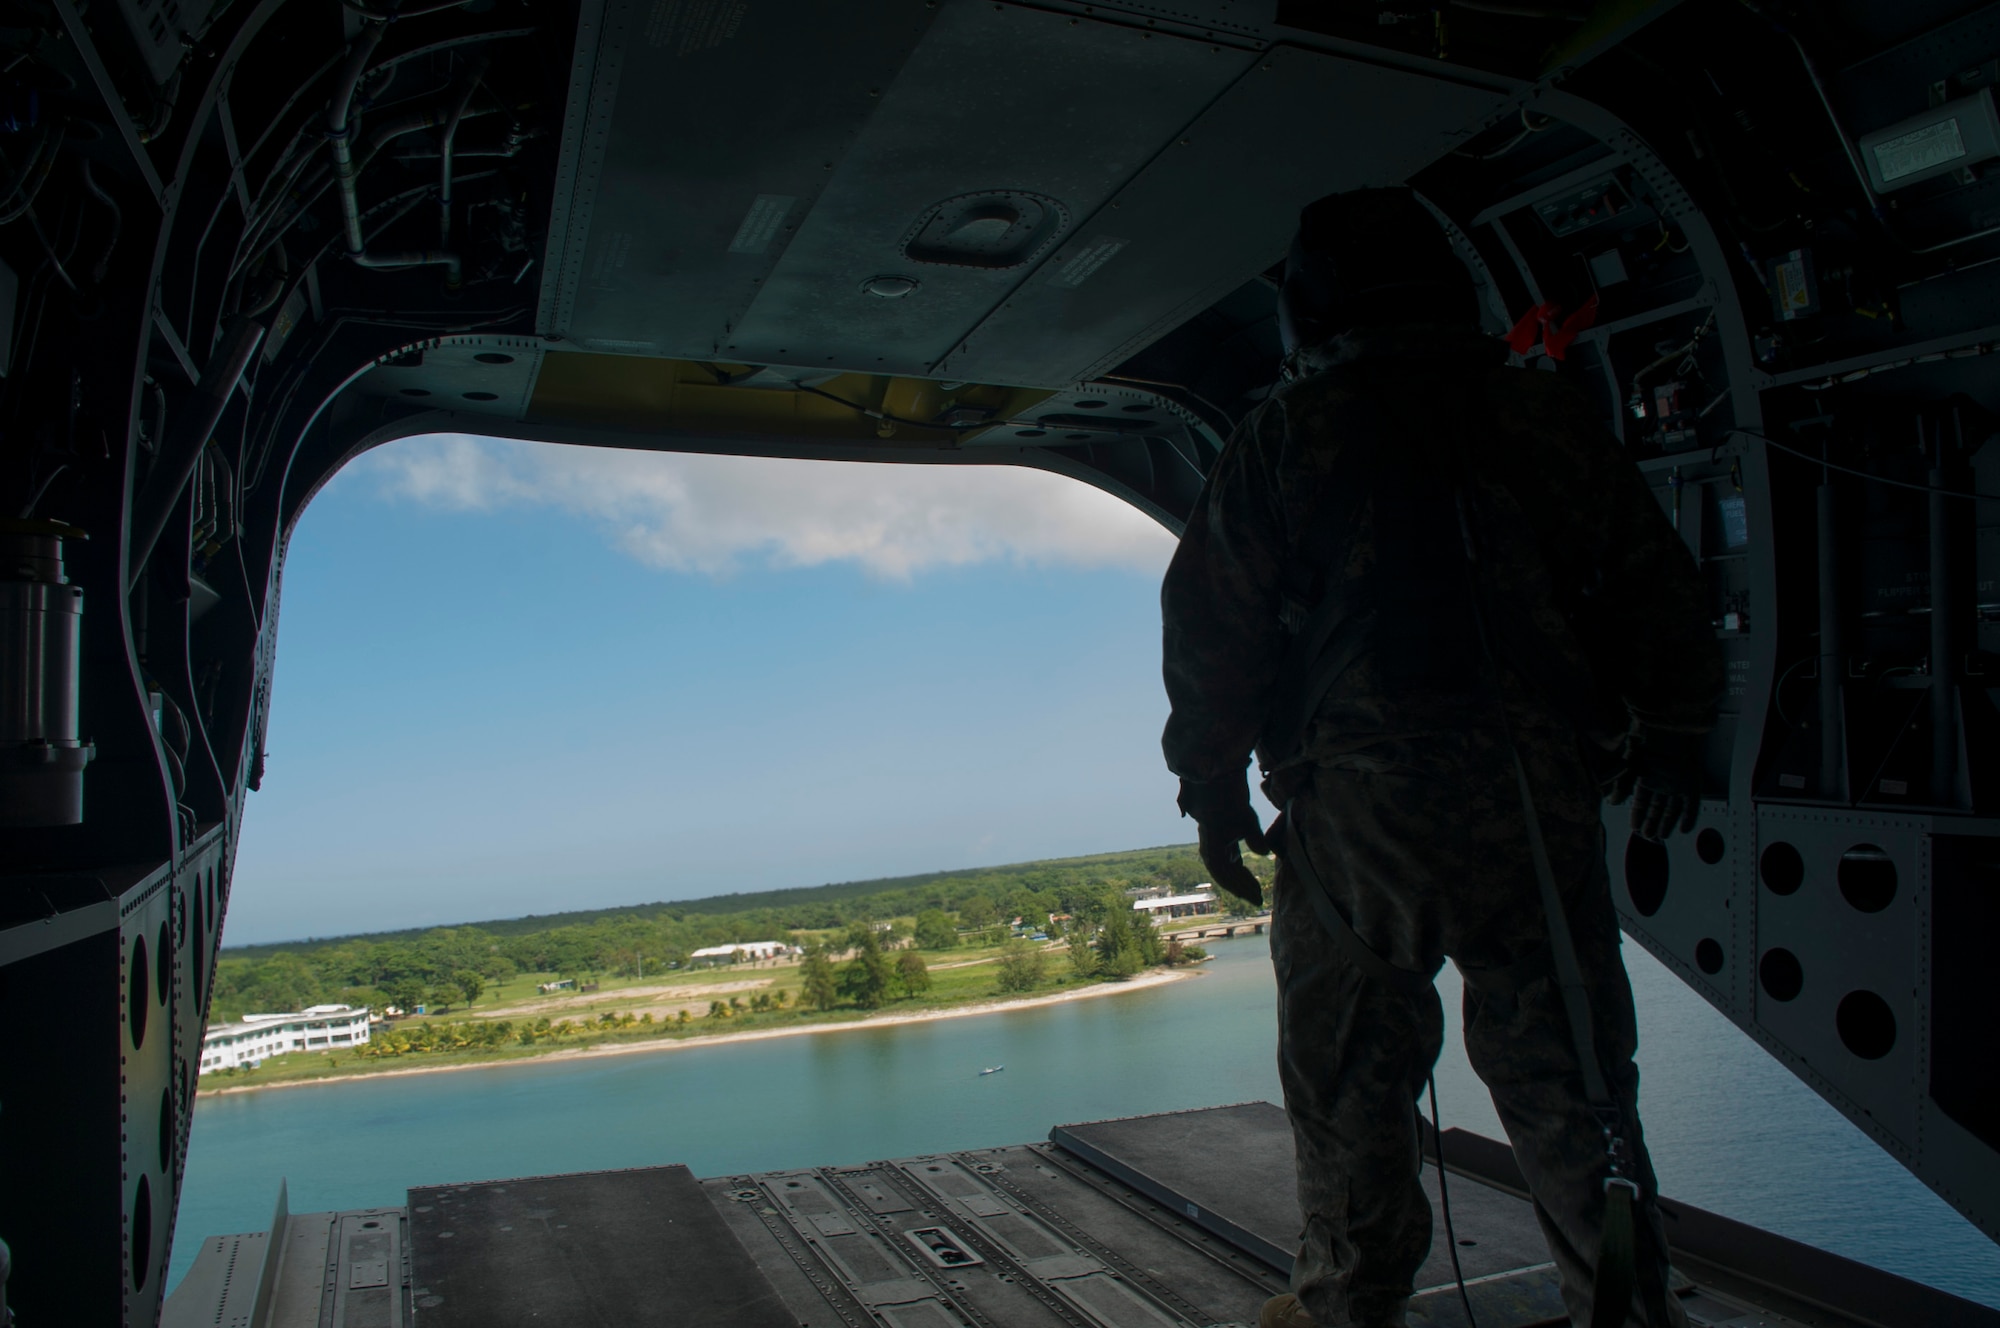 U.S. Army Sgt. David Pressnell, 1-228th Aviation Regiment flight engineer provides visual aid to his fellow U.S. Army CH-47 Chinook aircrew as the helicopter departs a Honduran base Dec. 17, 2015, in the Gracias a Dios Department (state) of Honduras. The CH-47 served as a transport for Honduran troops traveling to and from various outposts in the remote region to help disrupt the flow of illicit materials. (U.S. Air Force photo by Capt. Christopher Mesnard/Released)